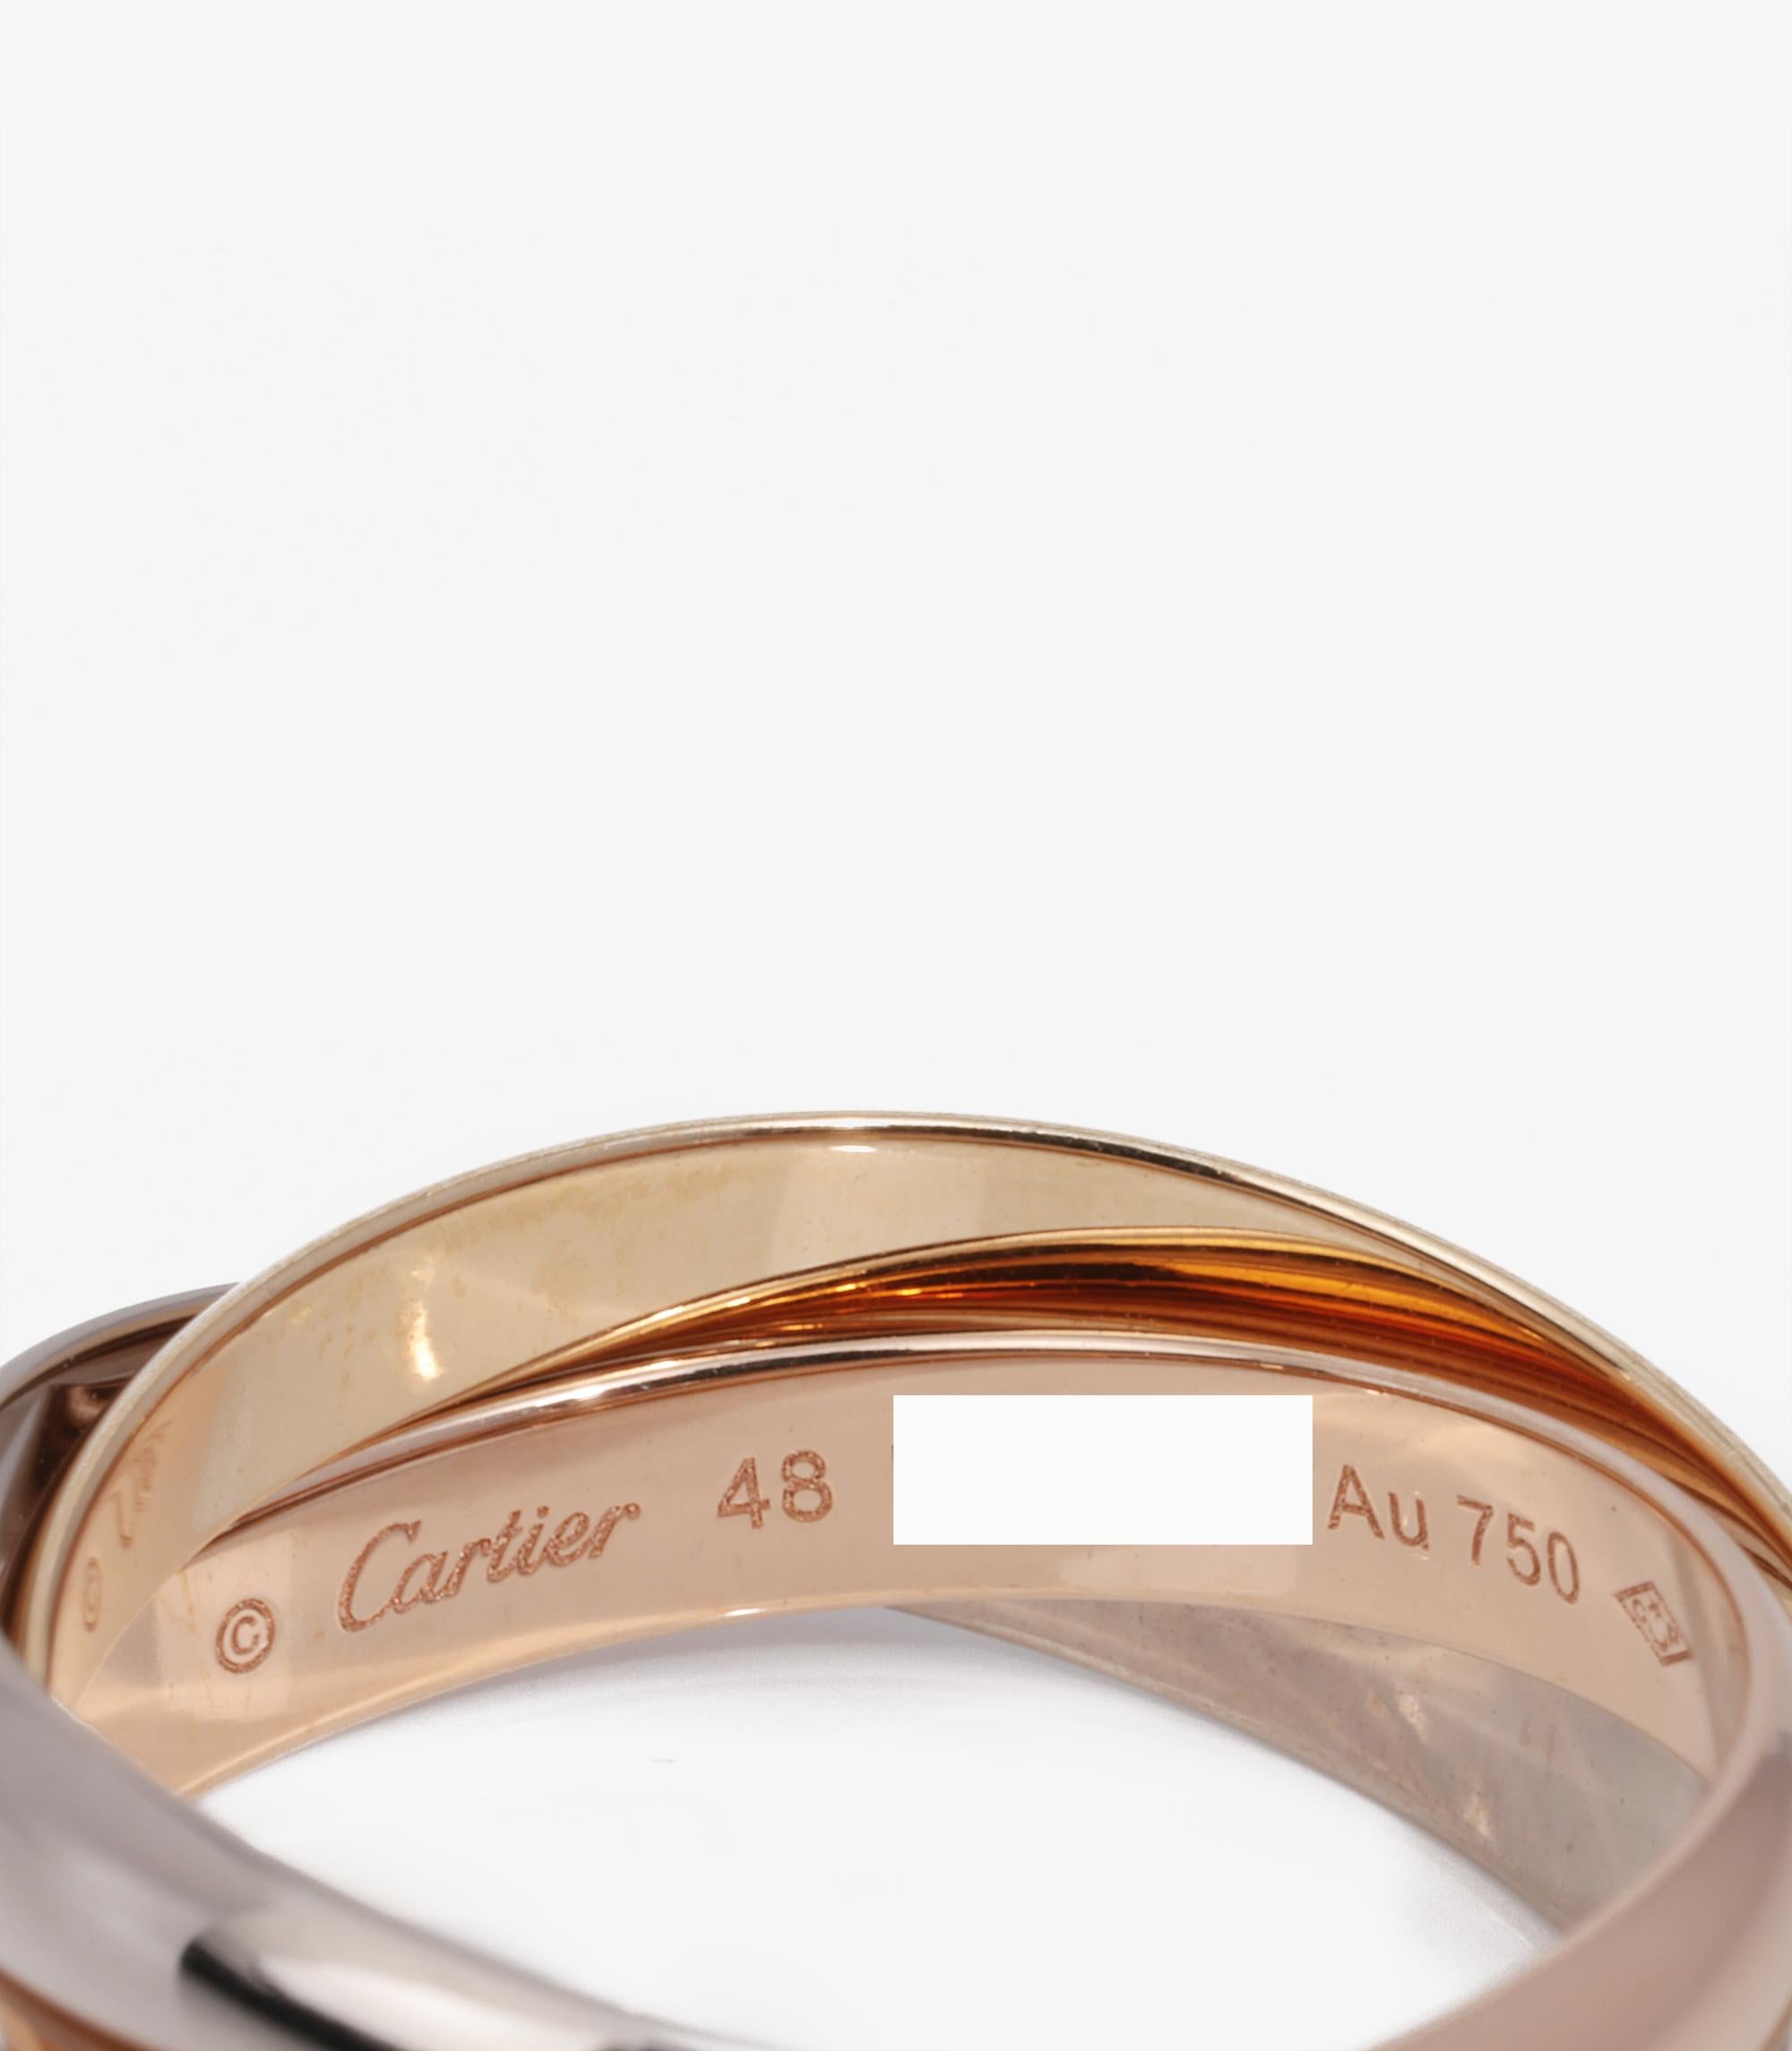 Cartier 18ct White Gold, 18ct Yellow Gold And 18ct Rose Gold Medium Trinity Ring In Excellent Condition For Sale In Bishop's Stortford, Hertfordshire